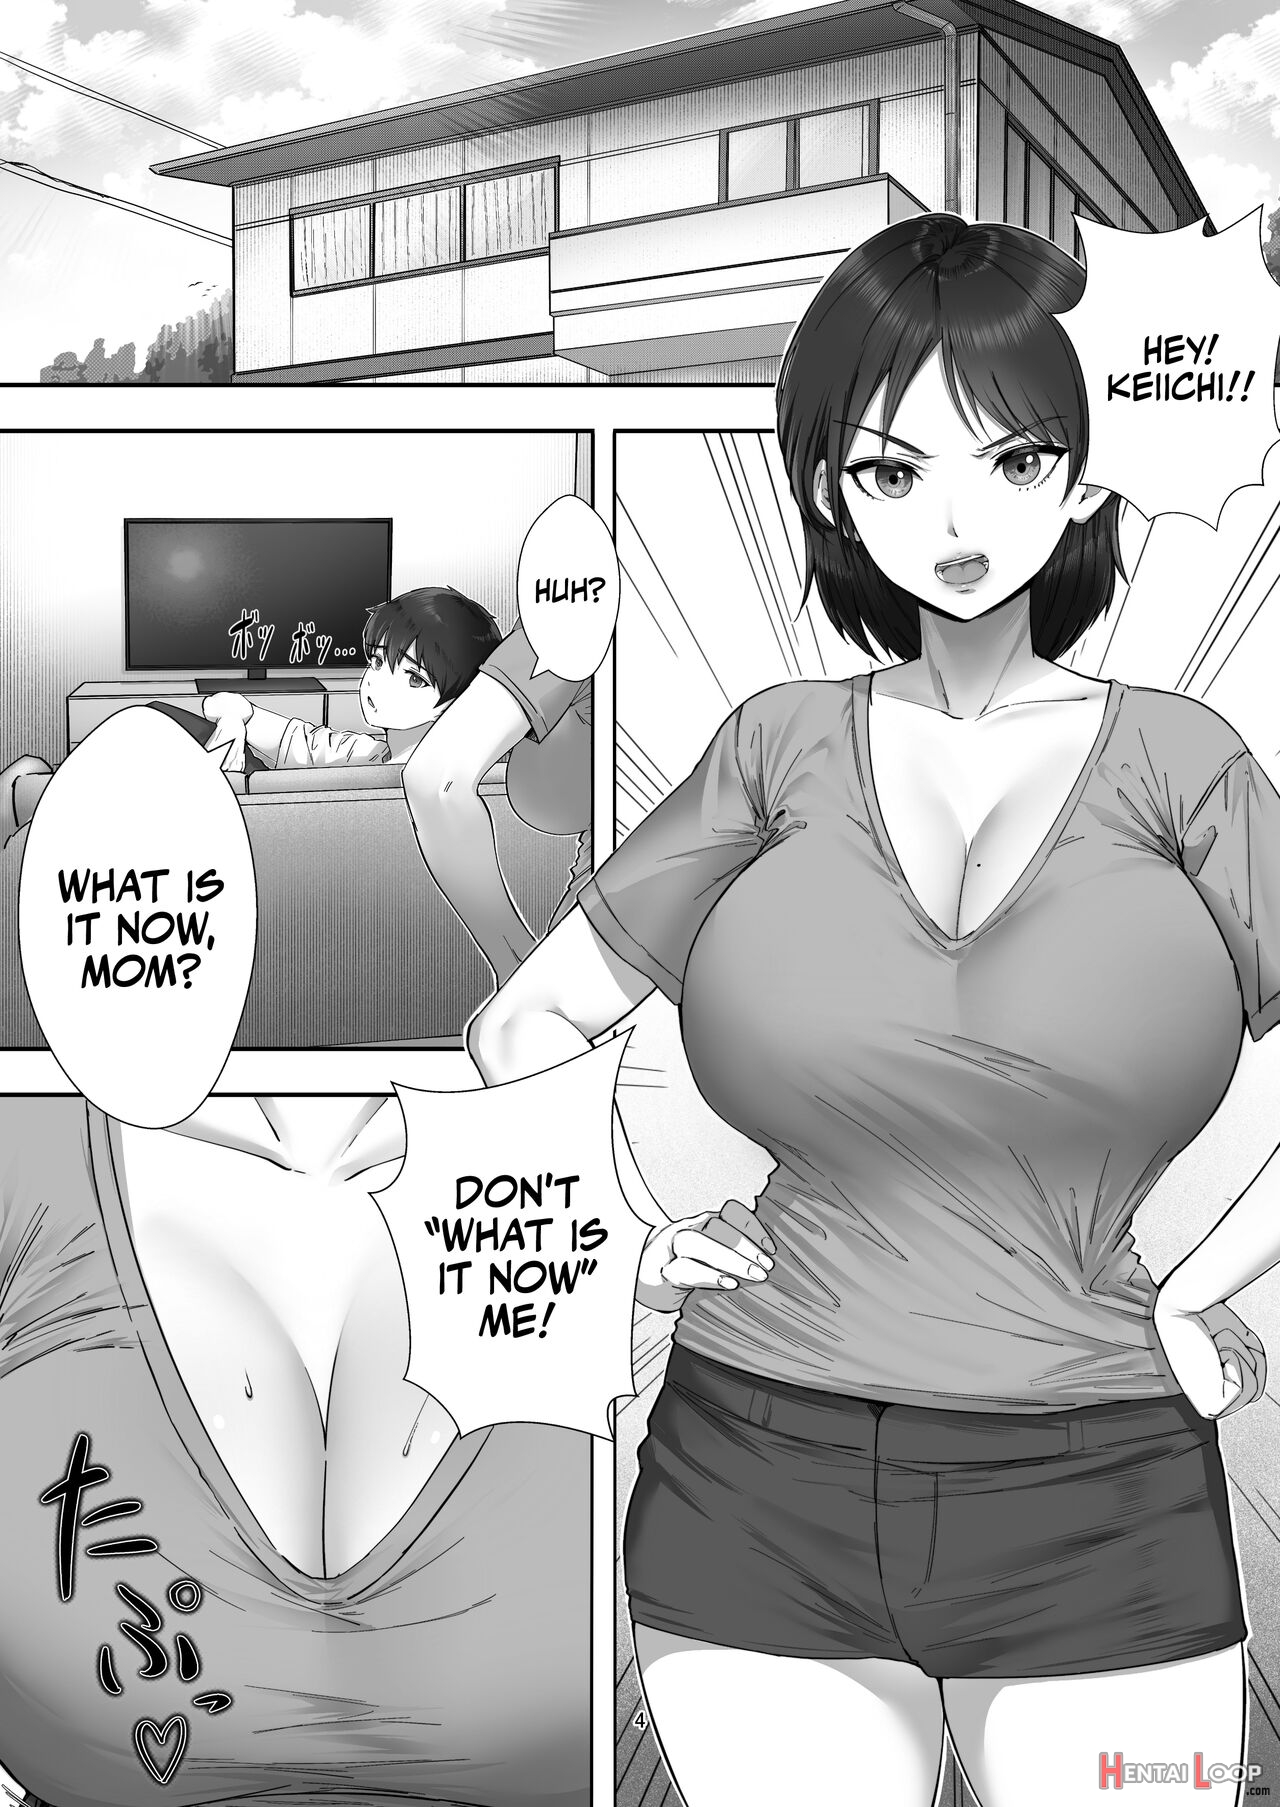 When I Ordered A Call Girl My Mom Actually Showed Up. page 3